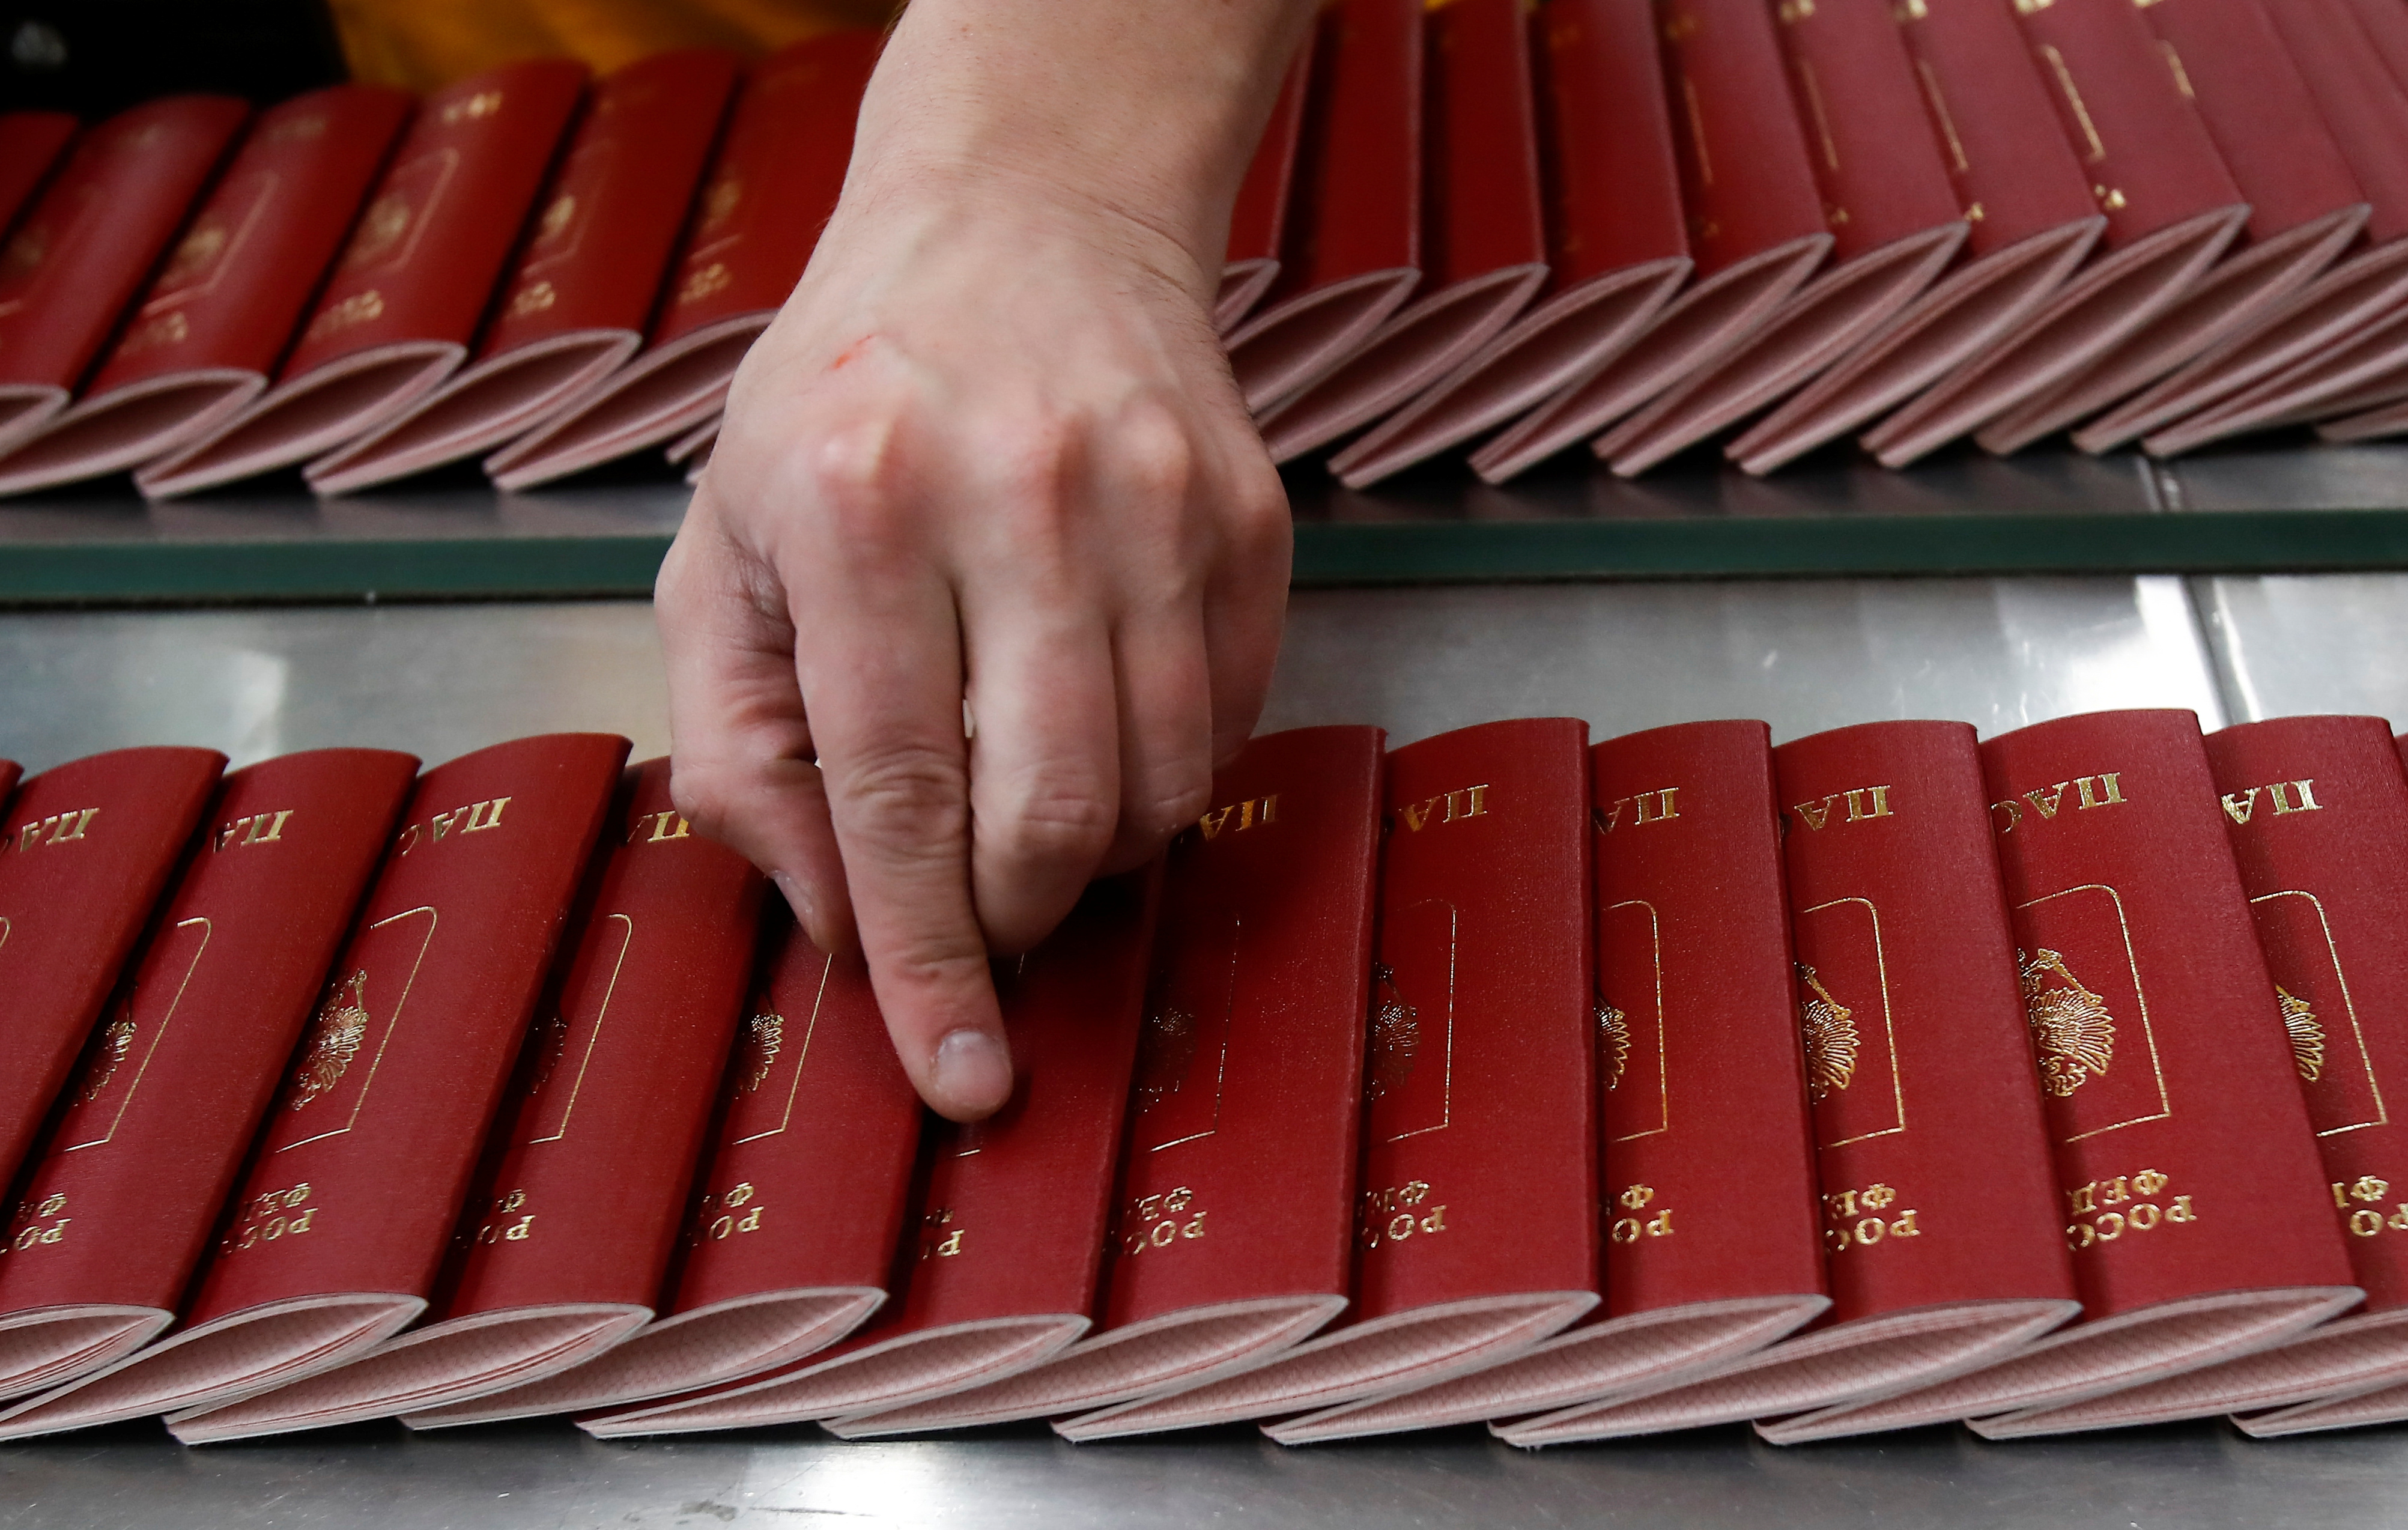 Russian passports are pictured during production at Goznak printing factory in Moscow